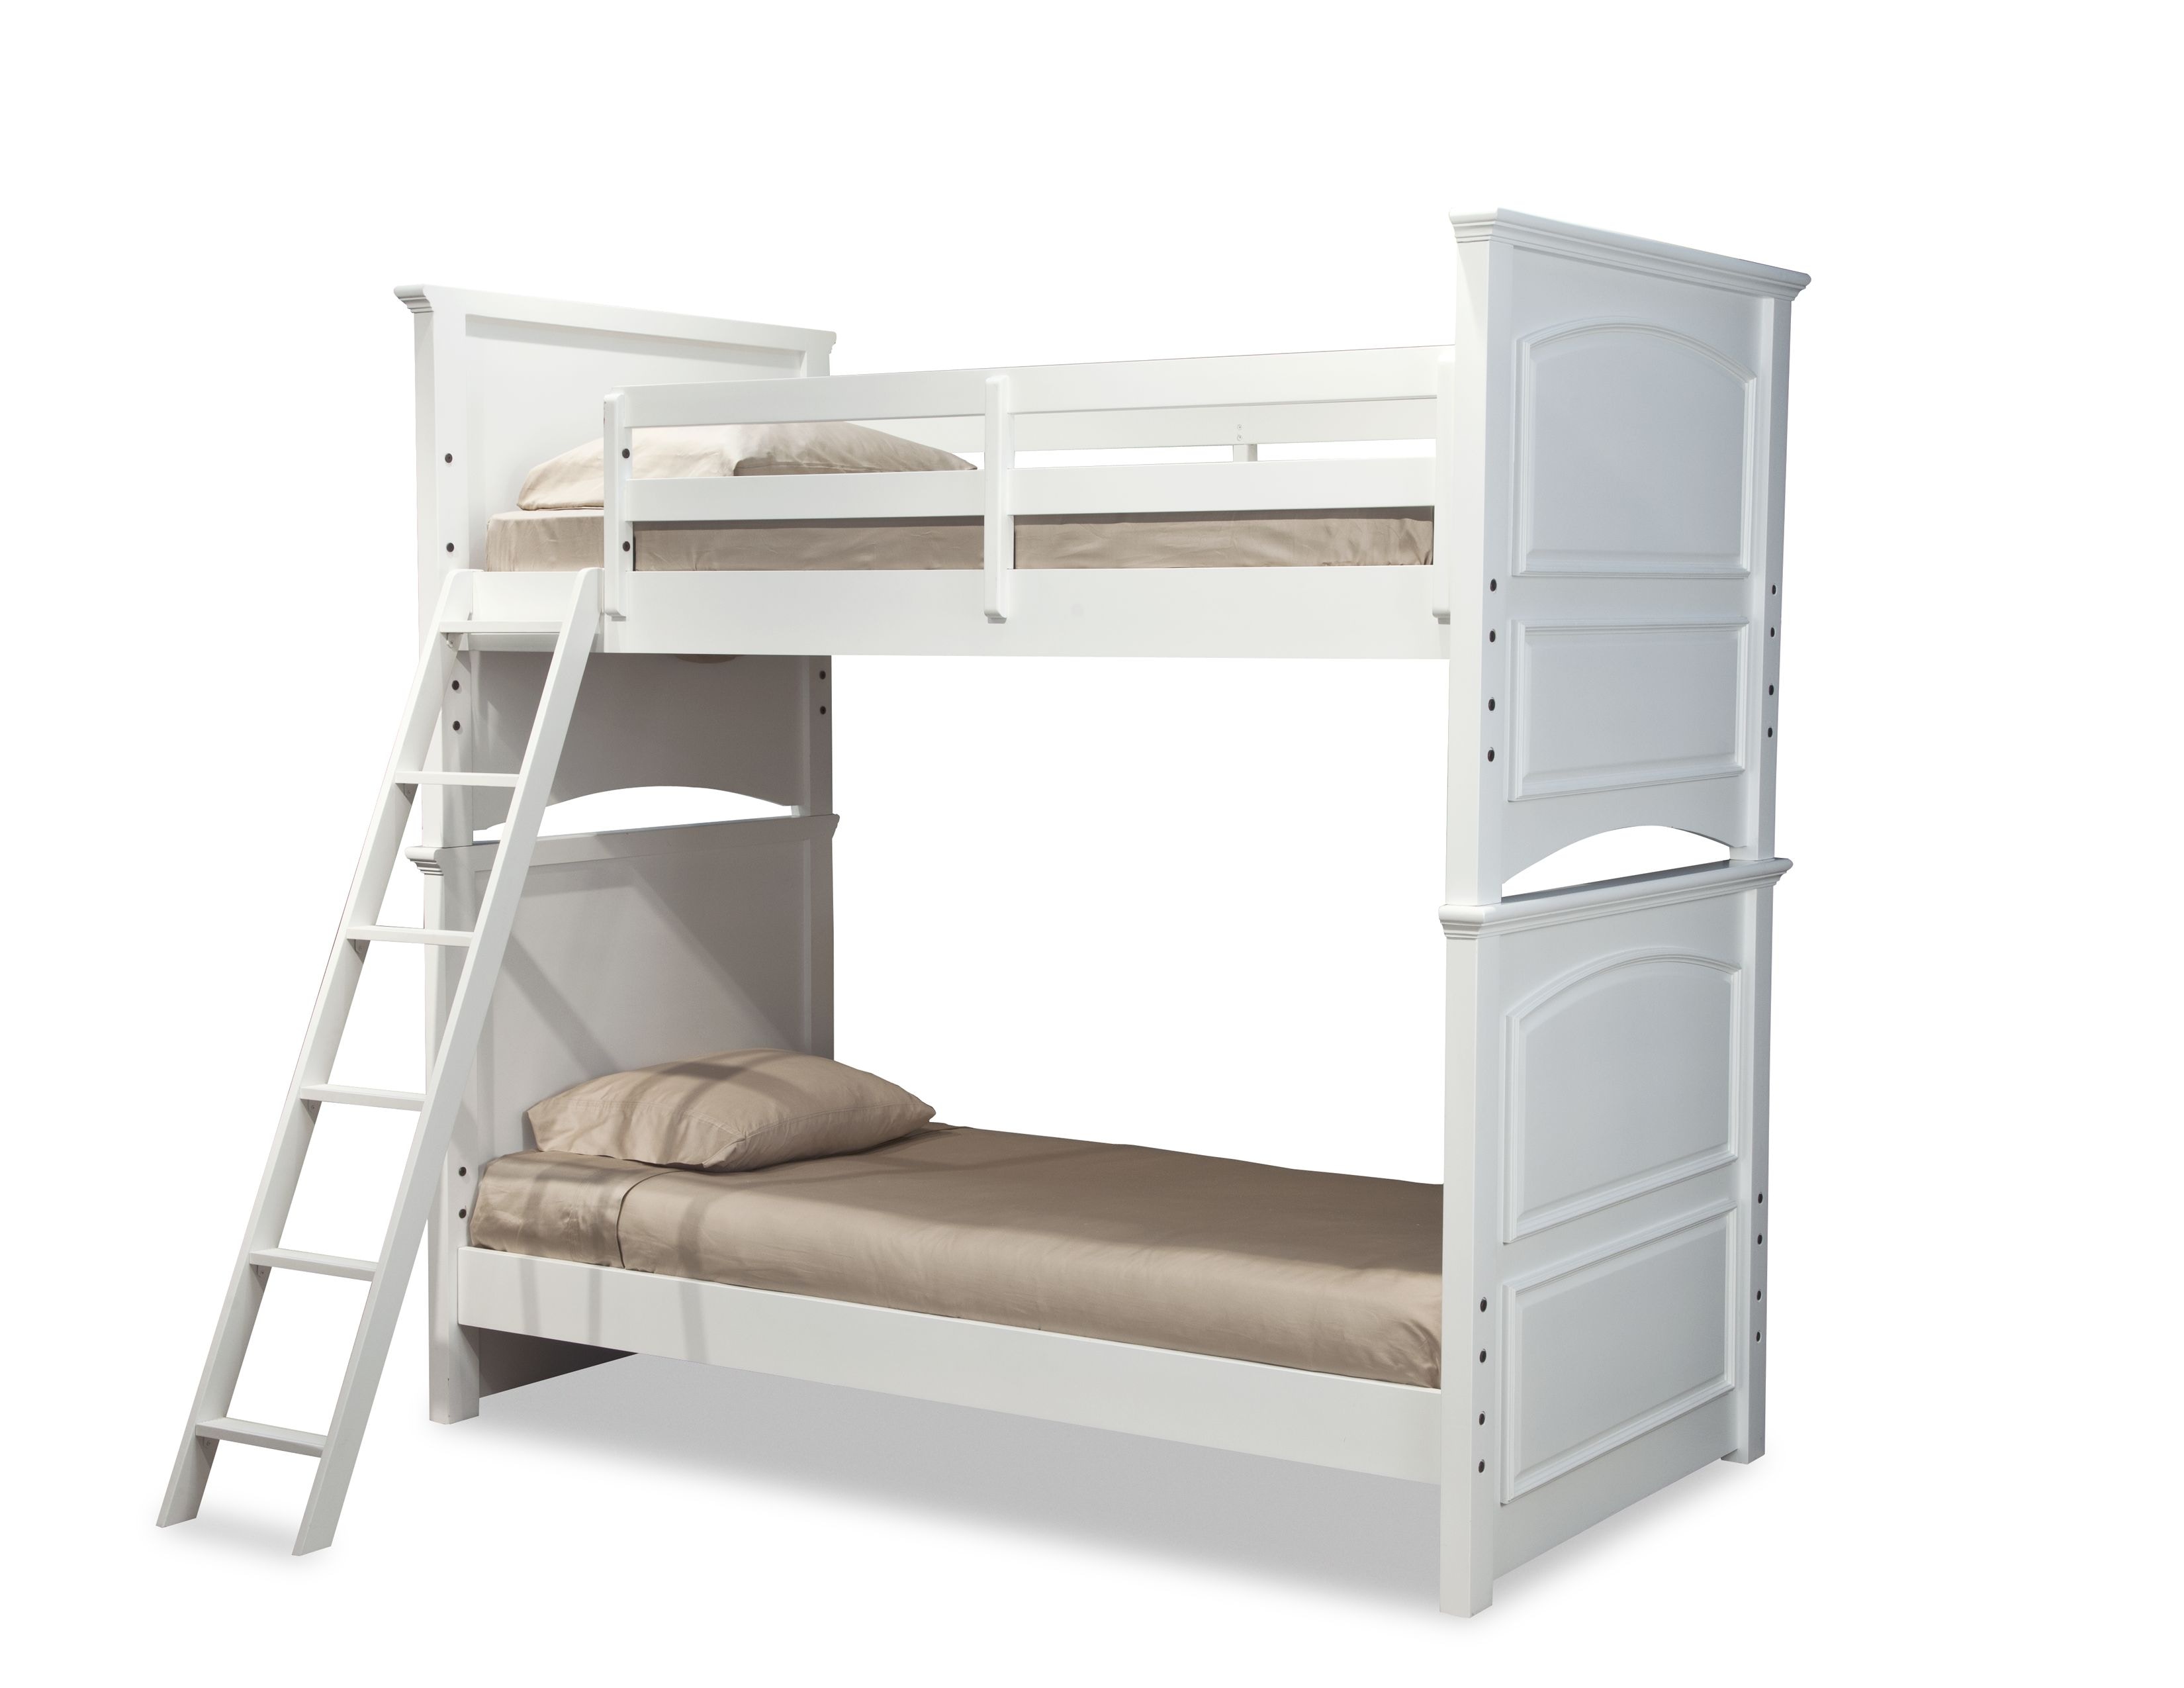 alice eriksen recommends co eds and bunk beds pic